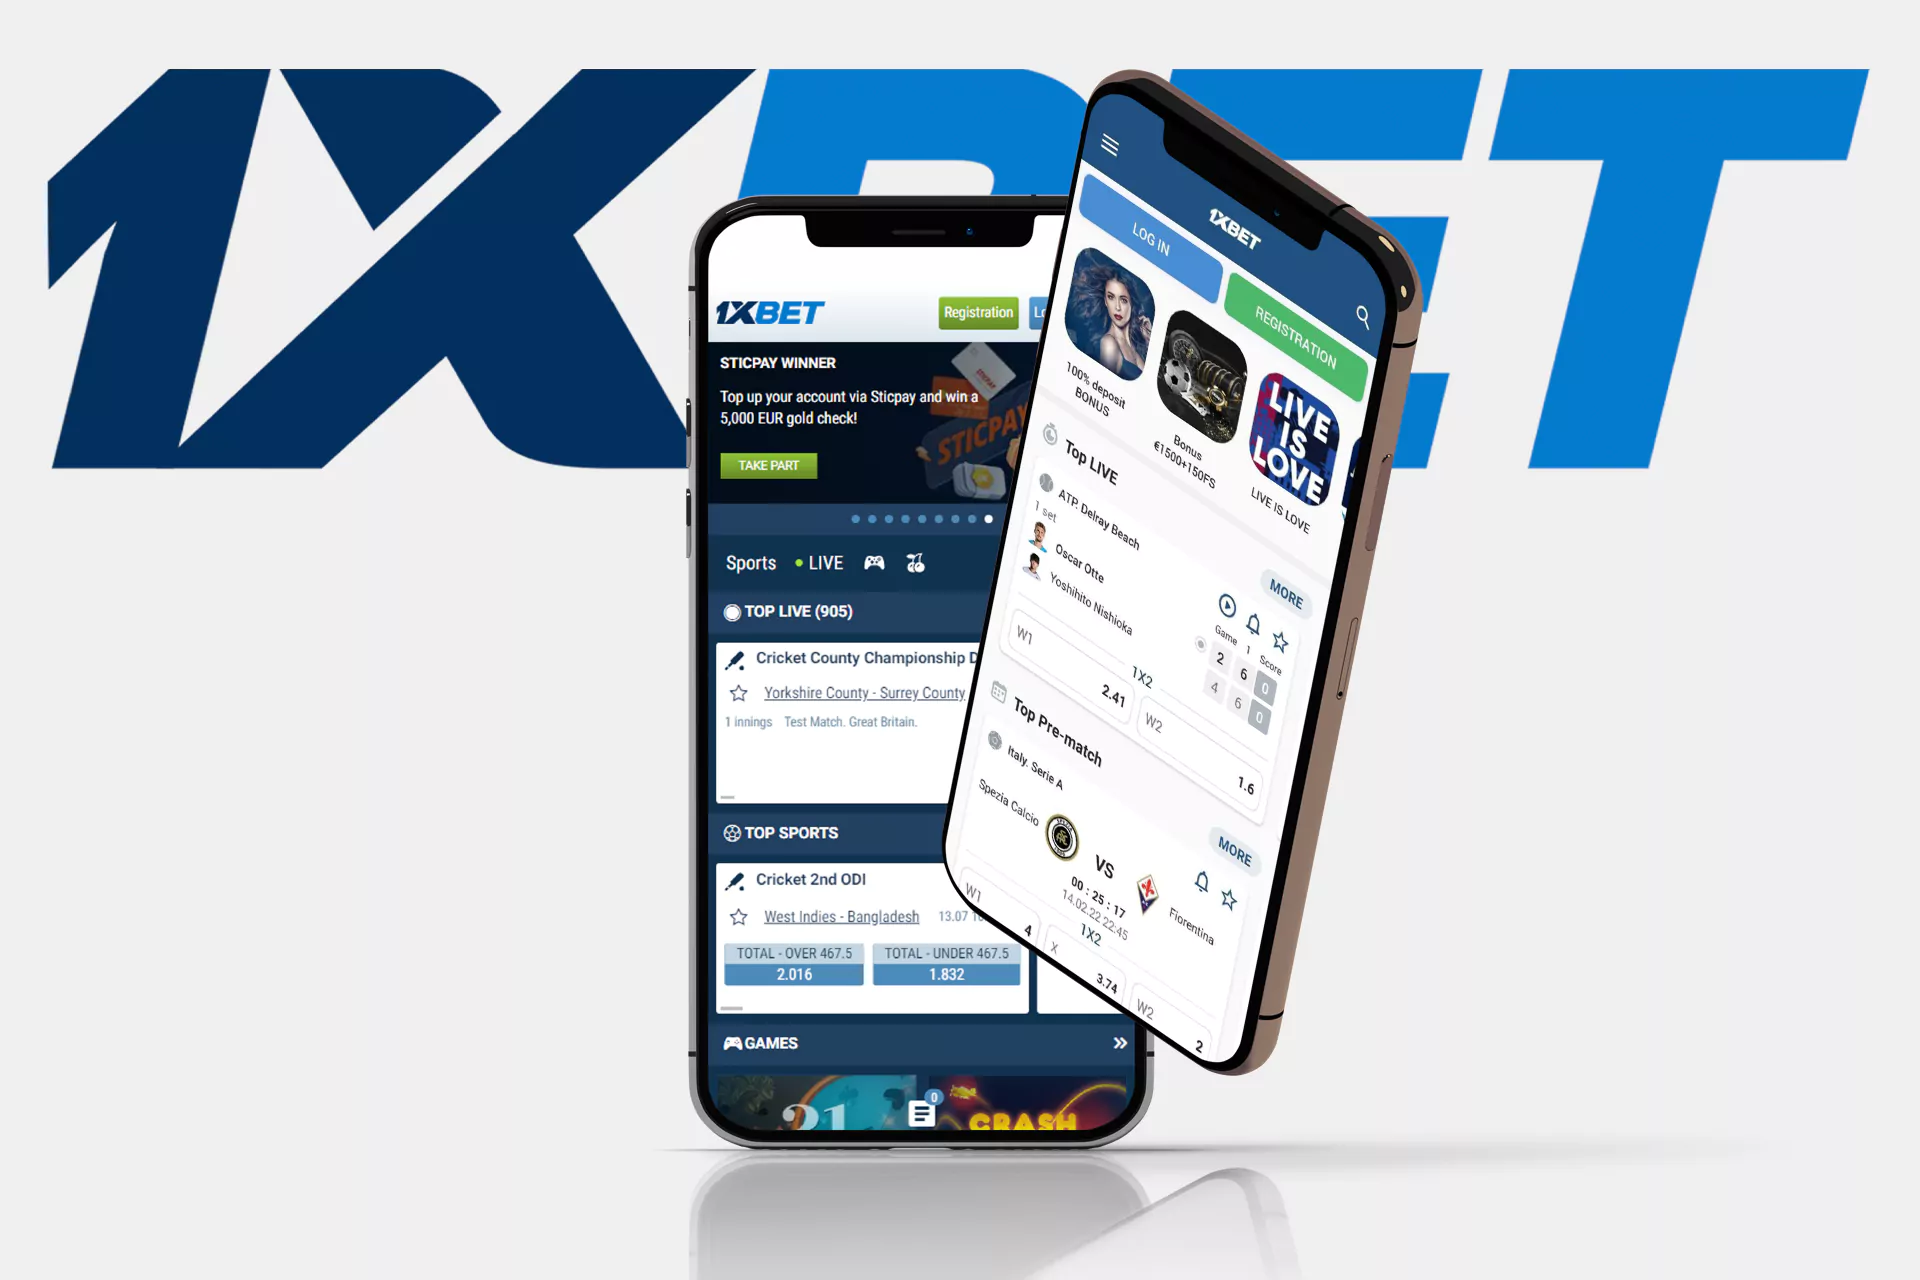 From a smartphone, you can place bets from both a browser or the 1xBet app.